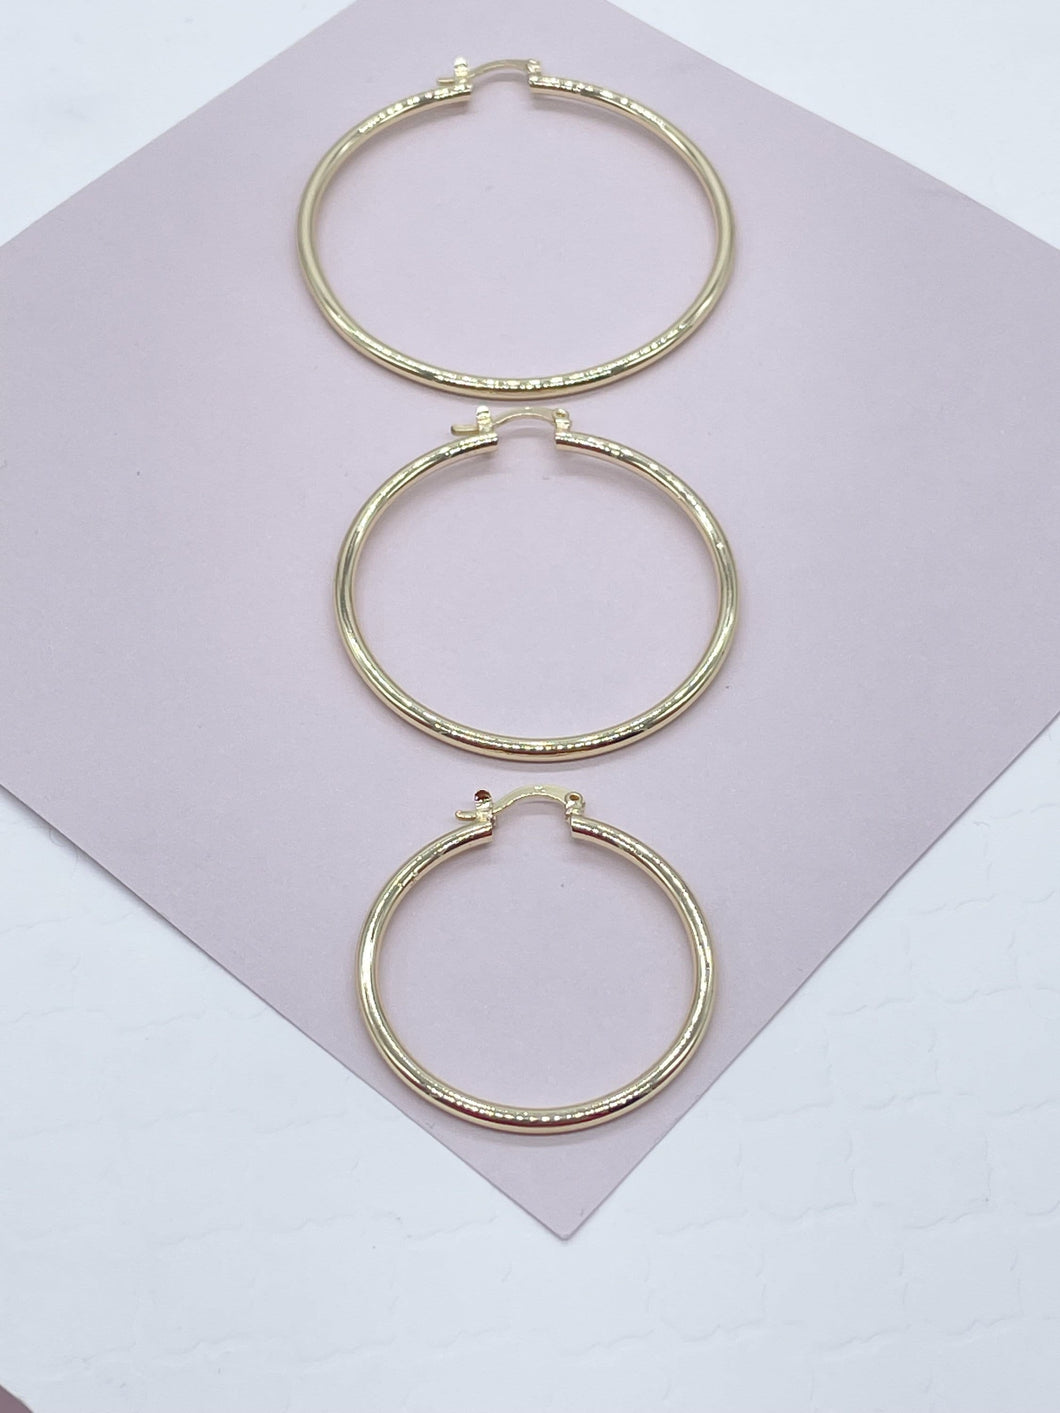 18k Gold Filled Plain Hoop Earrings Available Small, Medium, Large Sizes For the